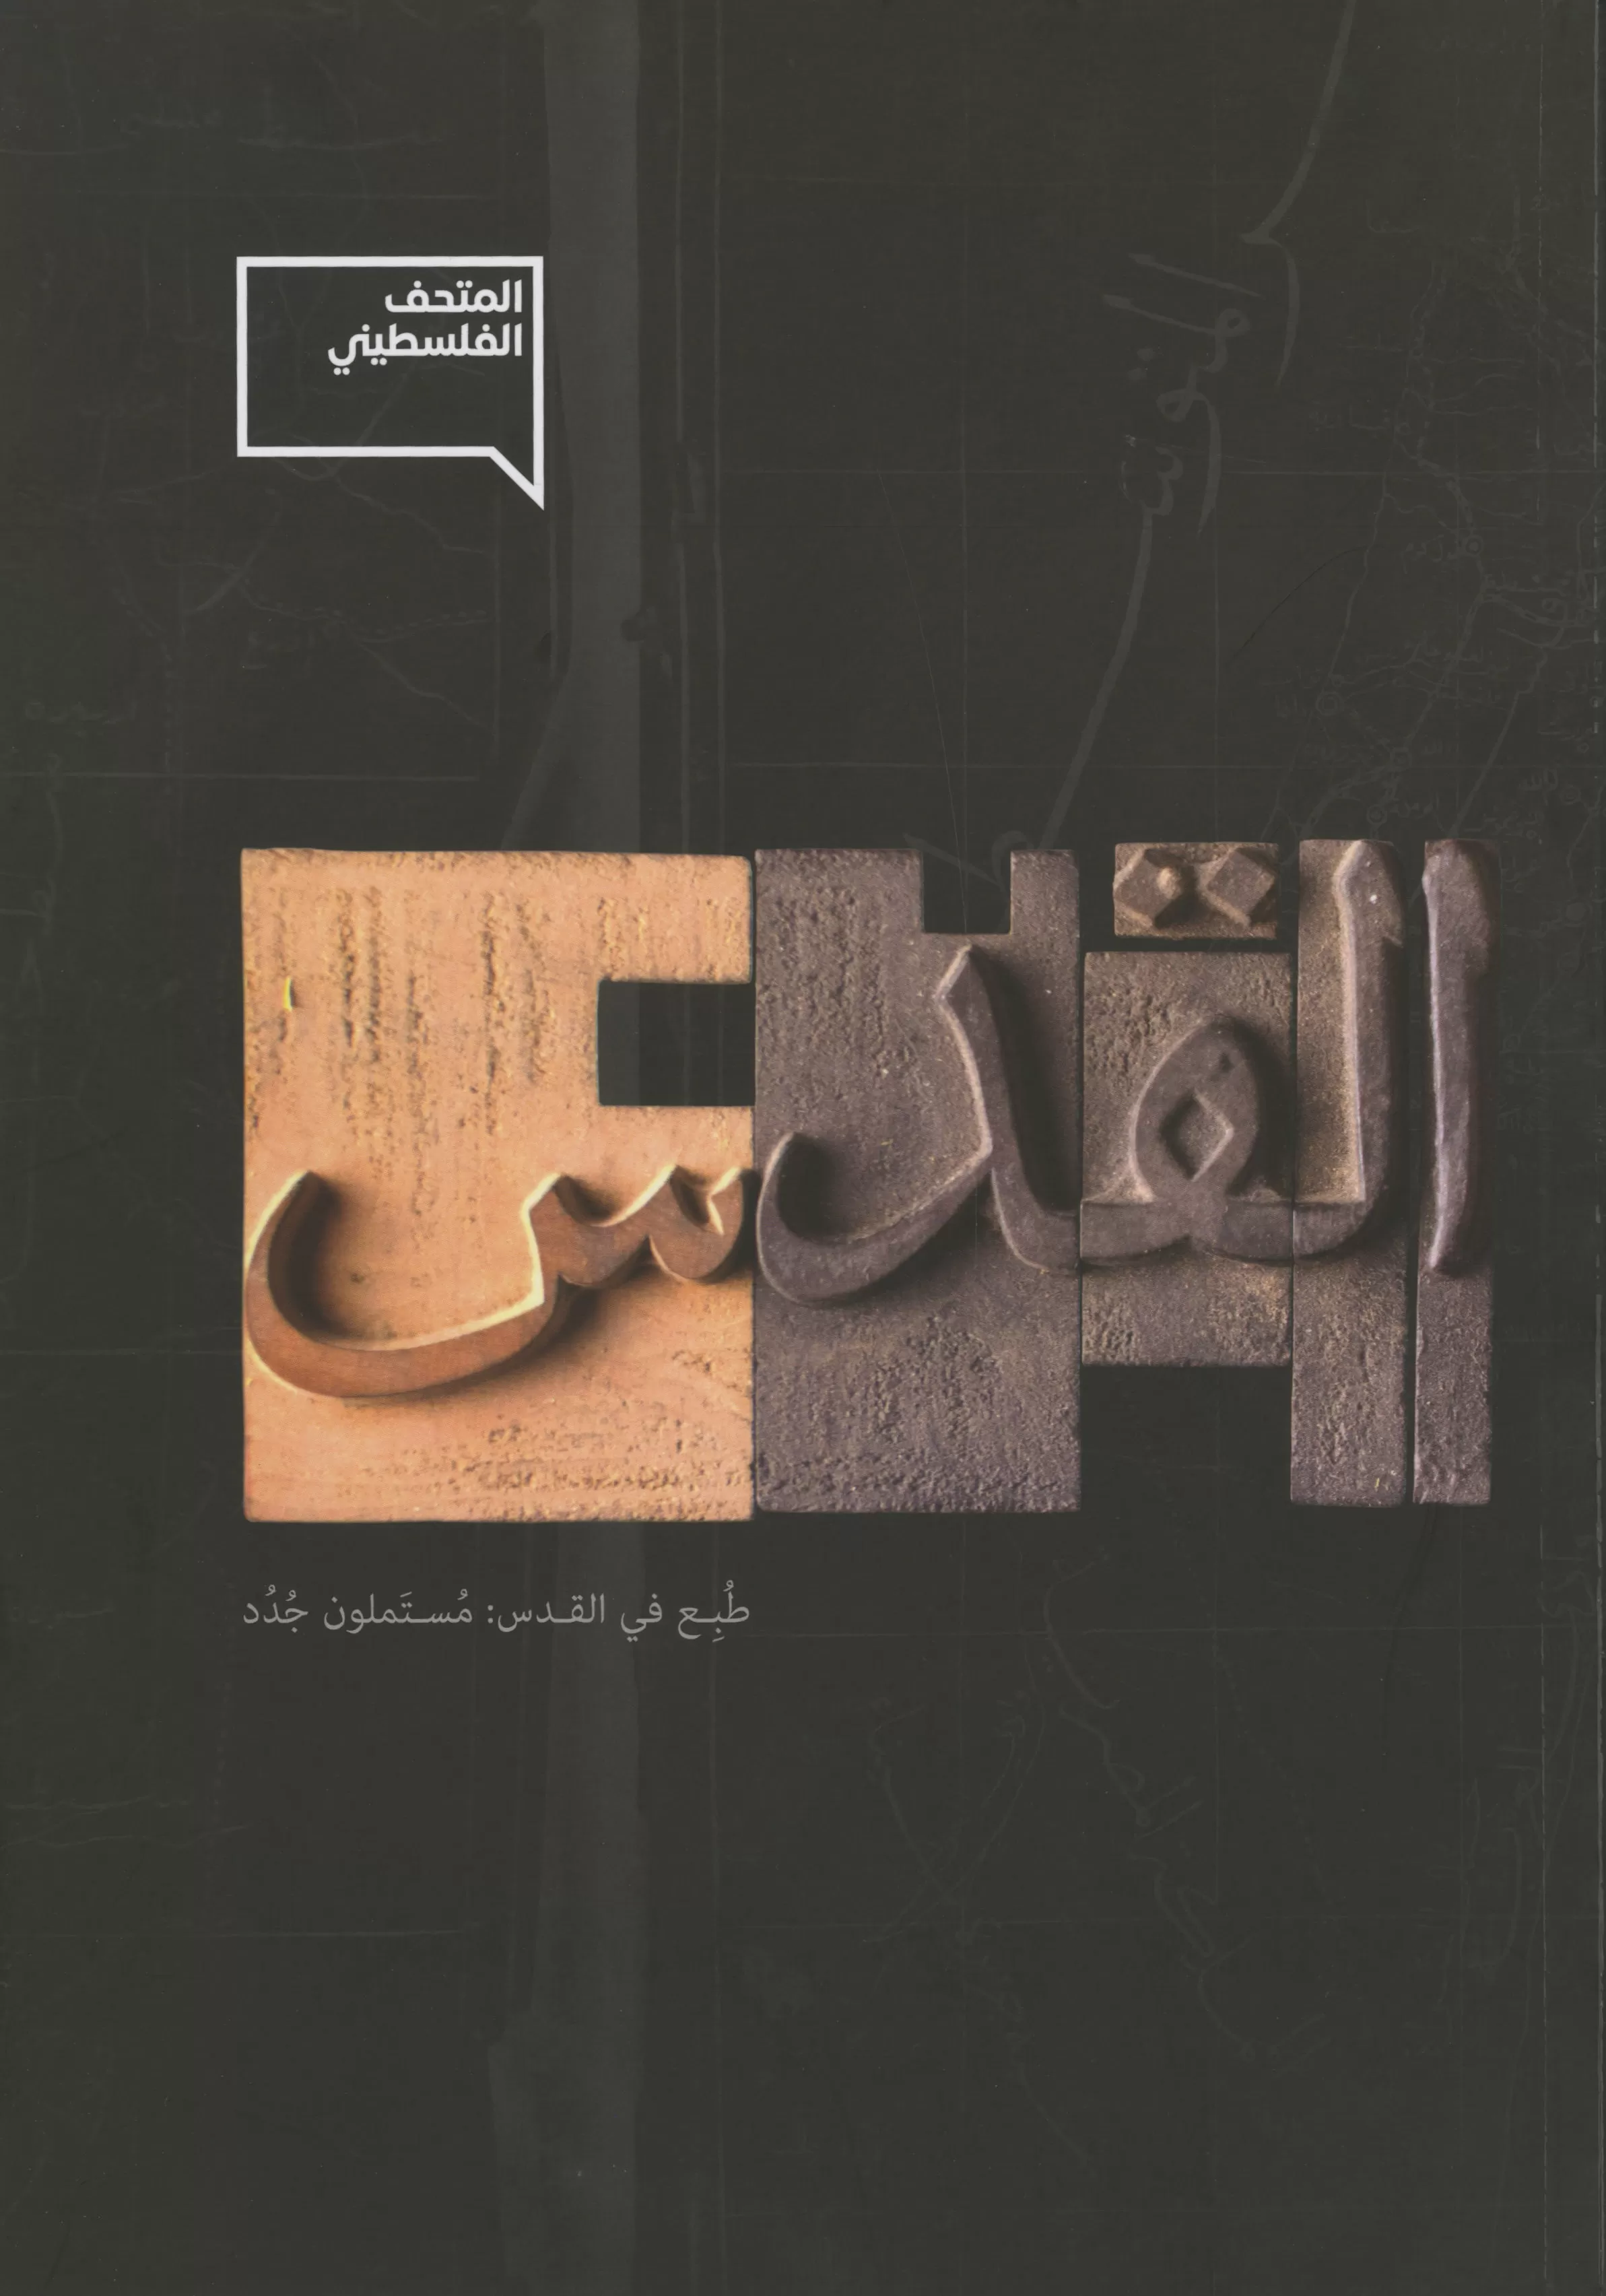 Book cover "Printed in Jerusalem Mustamloun (Exhibition Catalogue)"